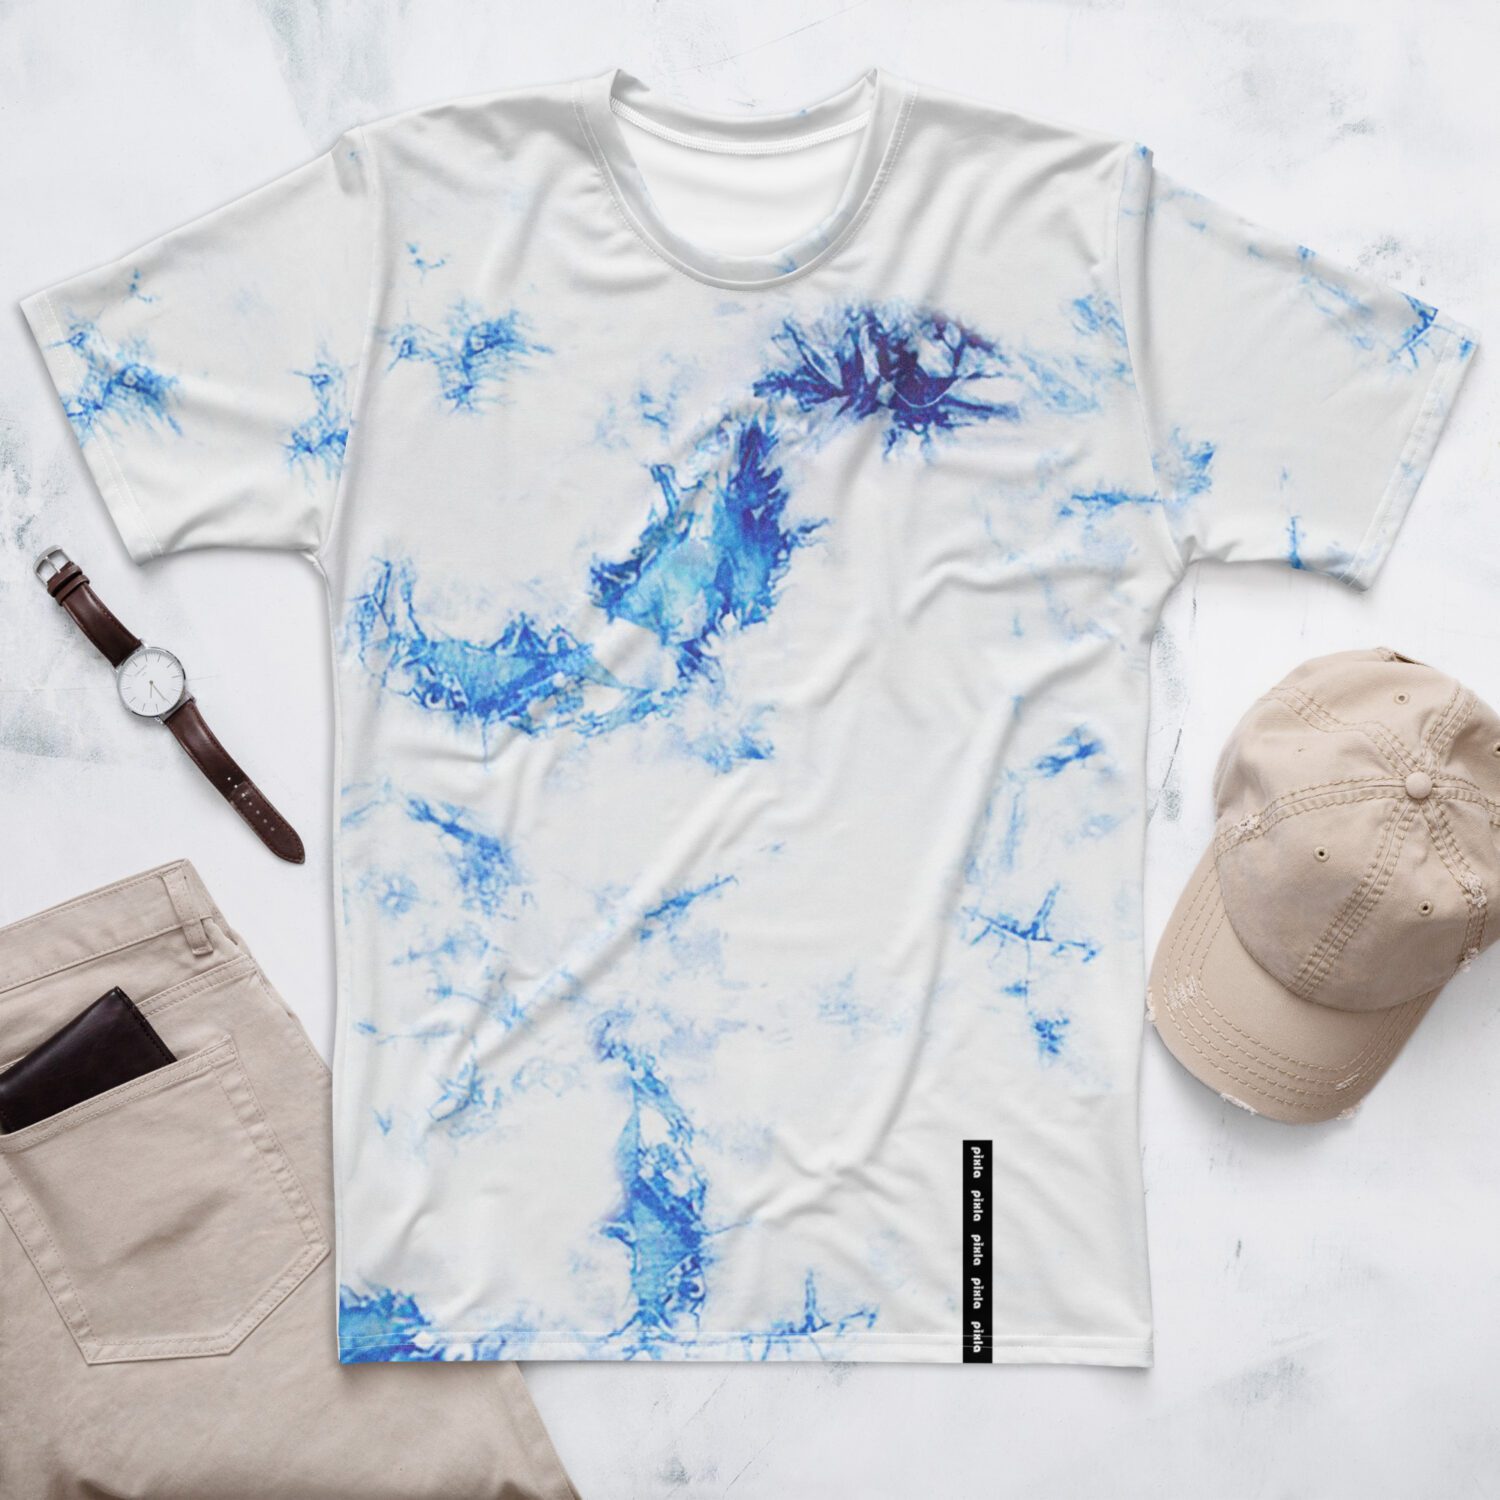 Favorite cobalt blue and white t-shirt in a tie dye print. It's super smooth, comfortable, and made from a cotton touch polyester jersey and comes with sublimated print all over that won’t fade after washing.